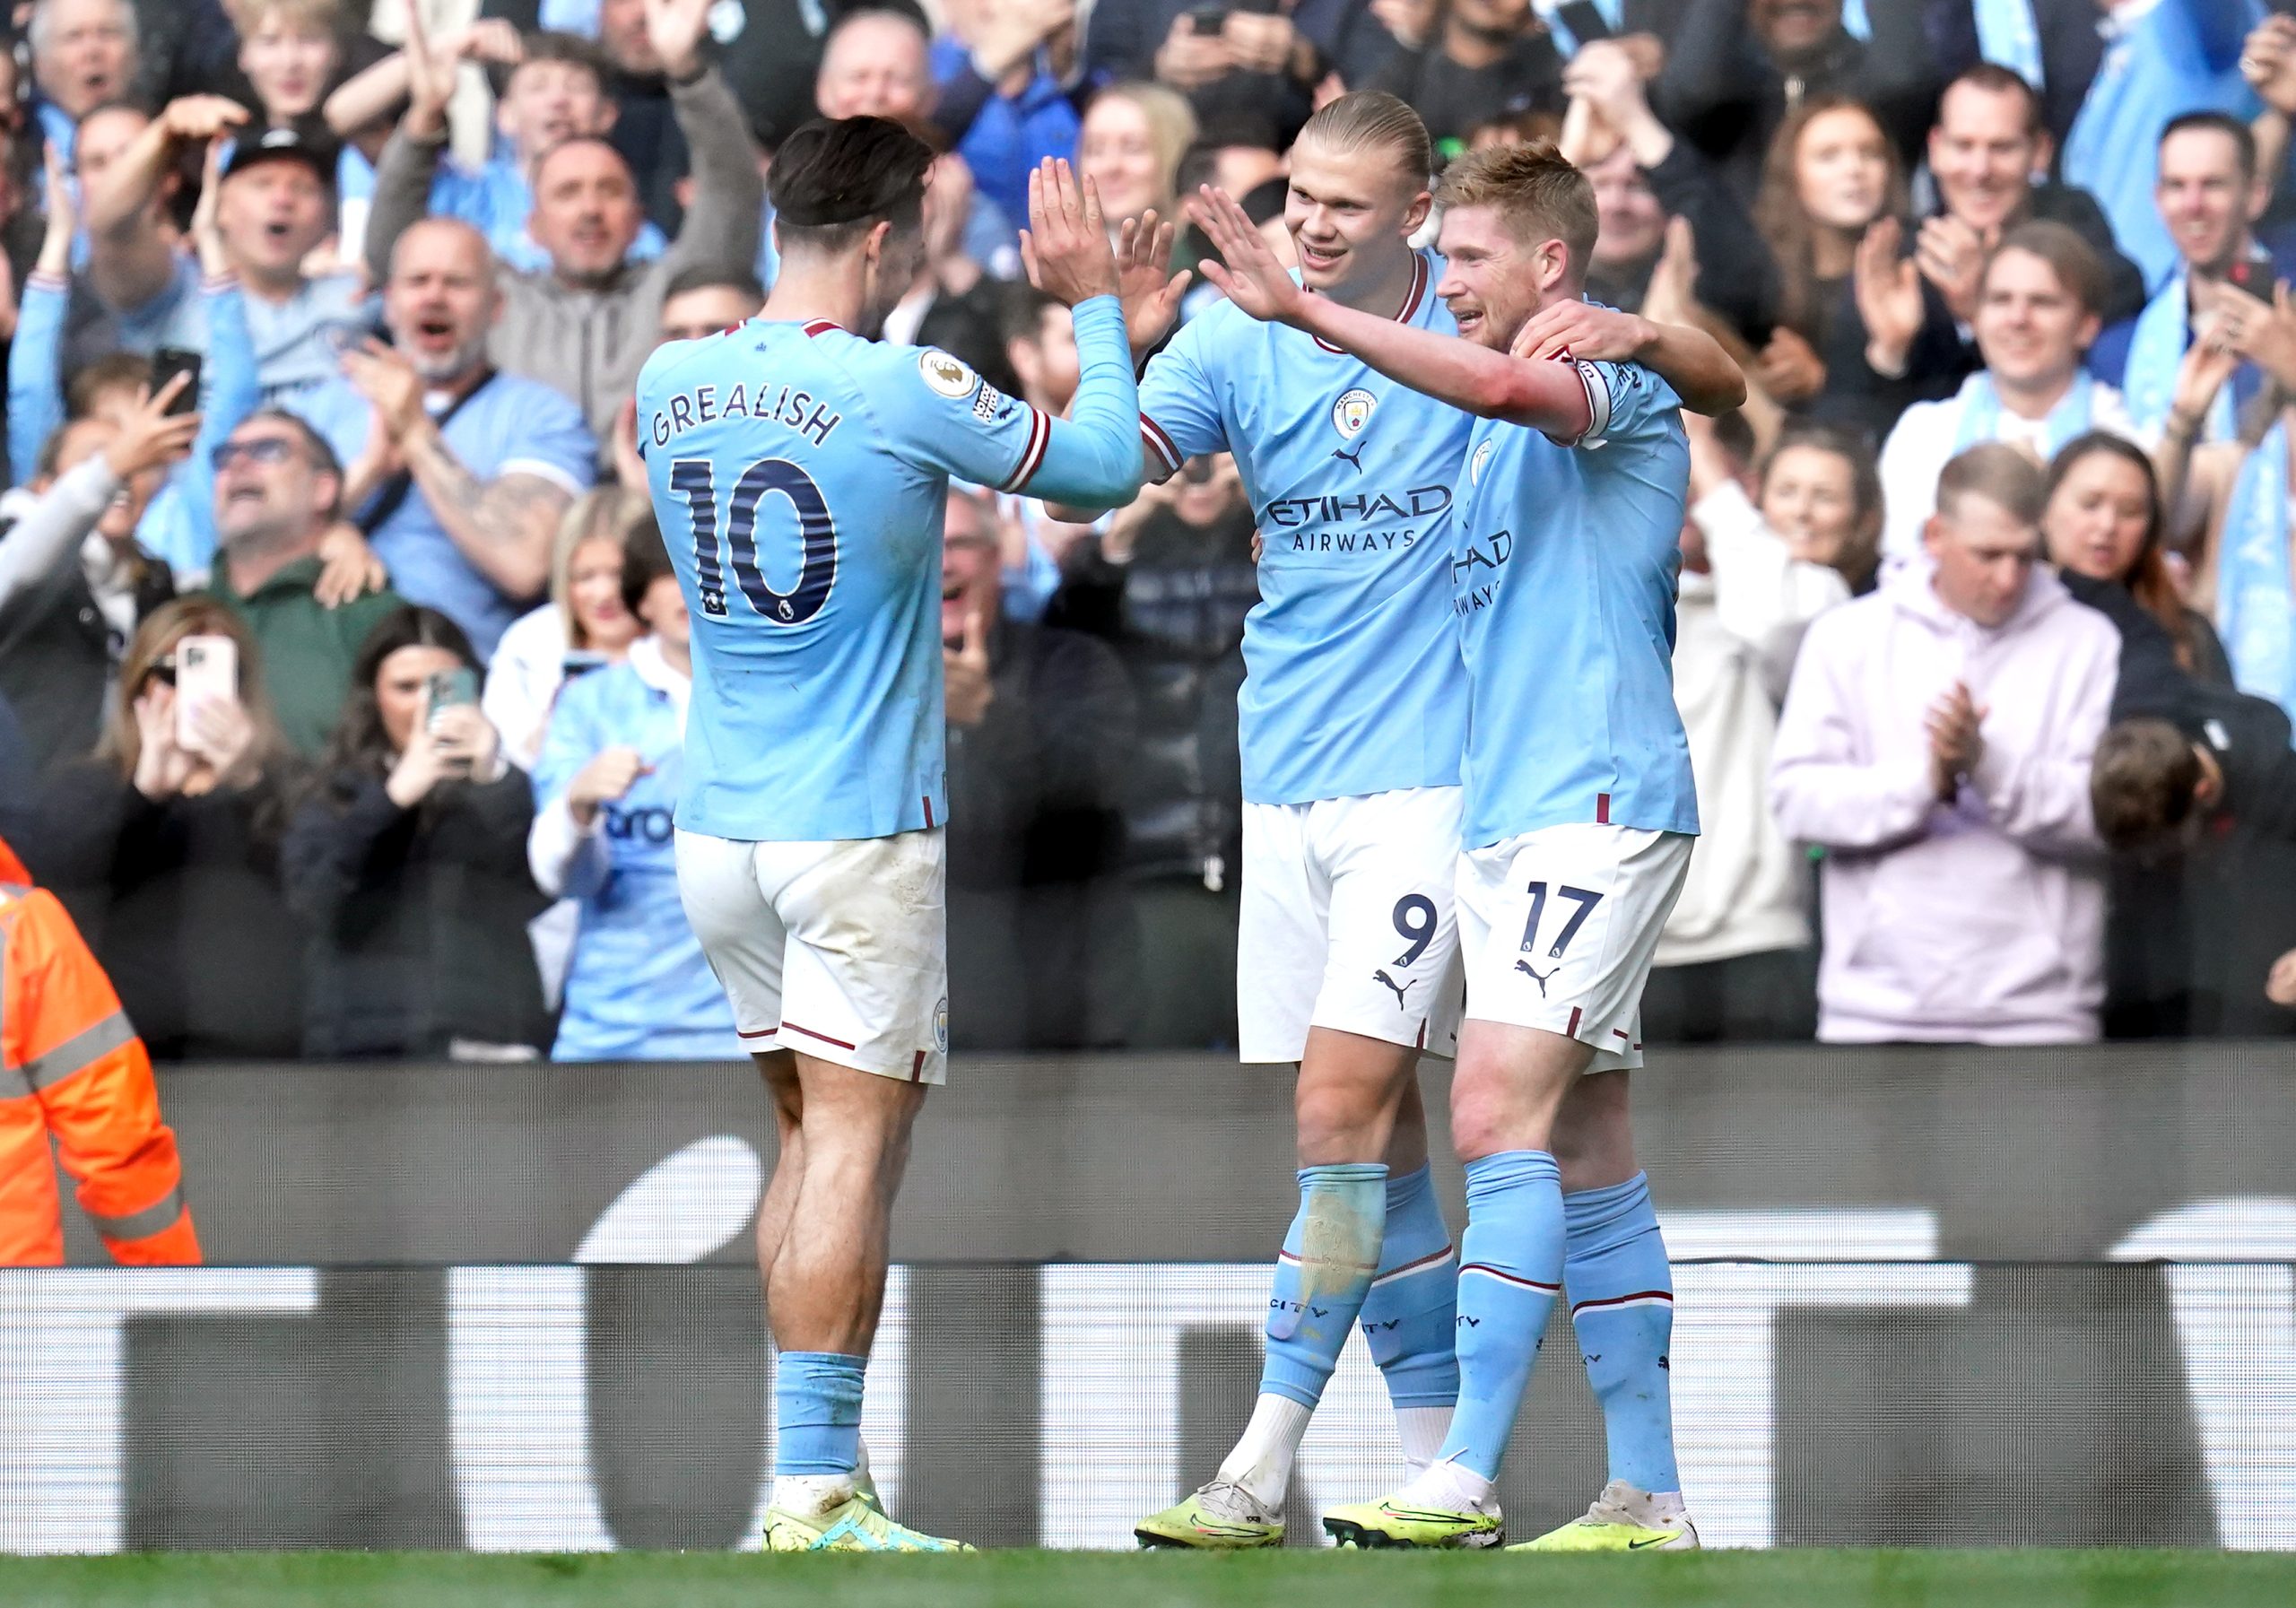 The key performers in Manchester City’s trophy treble